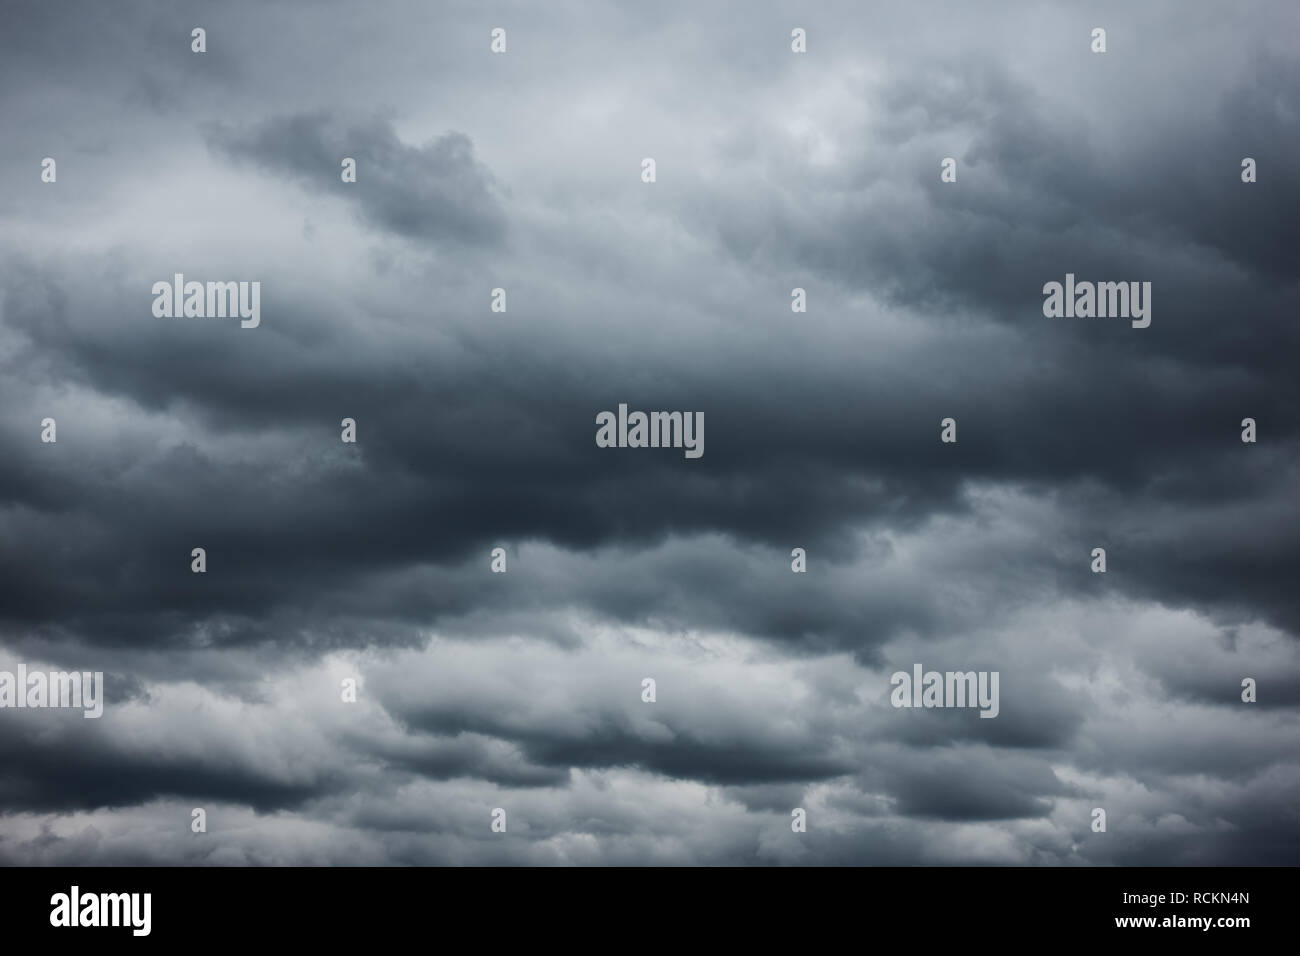 Bad weather - Heavy rain clouds, may be used as background Stock Photo